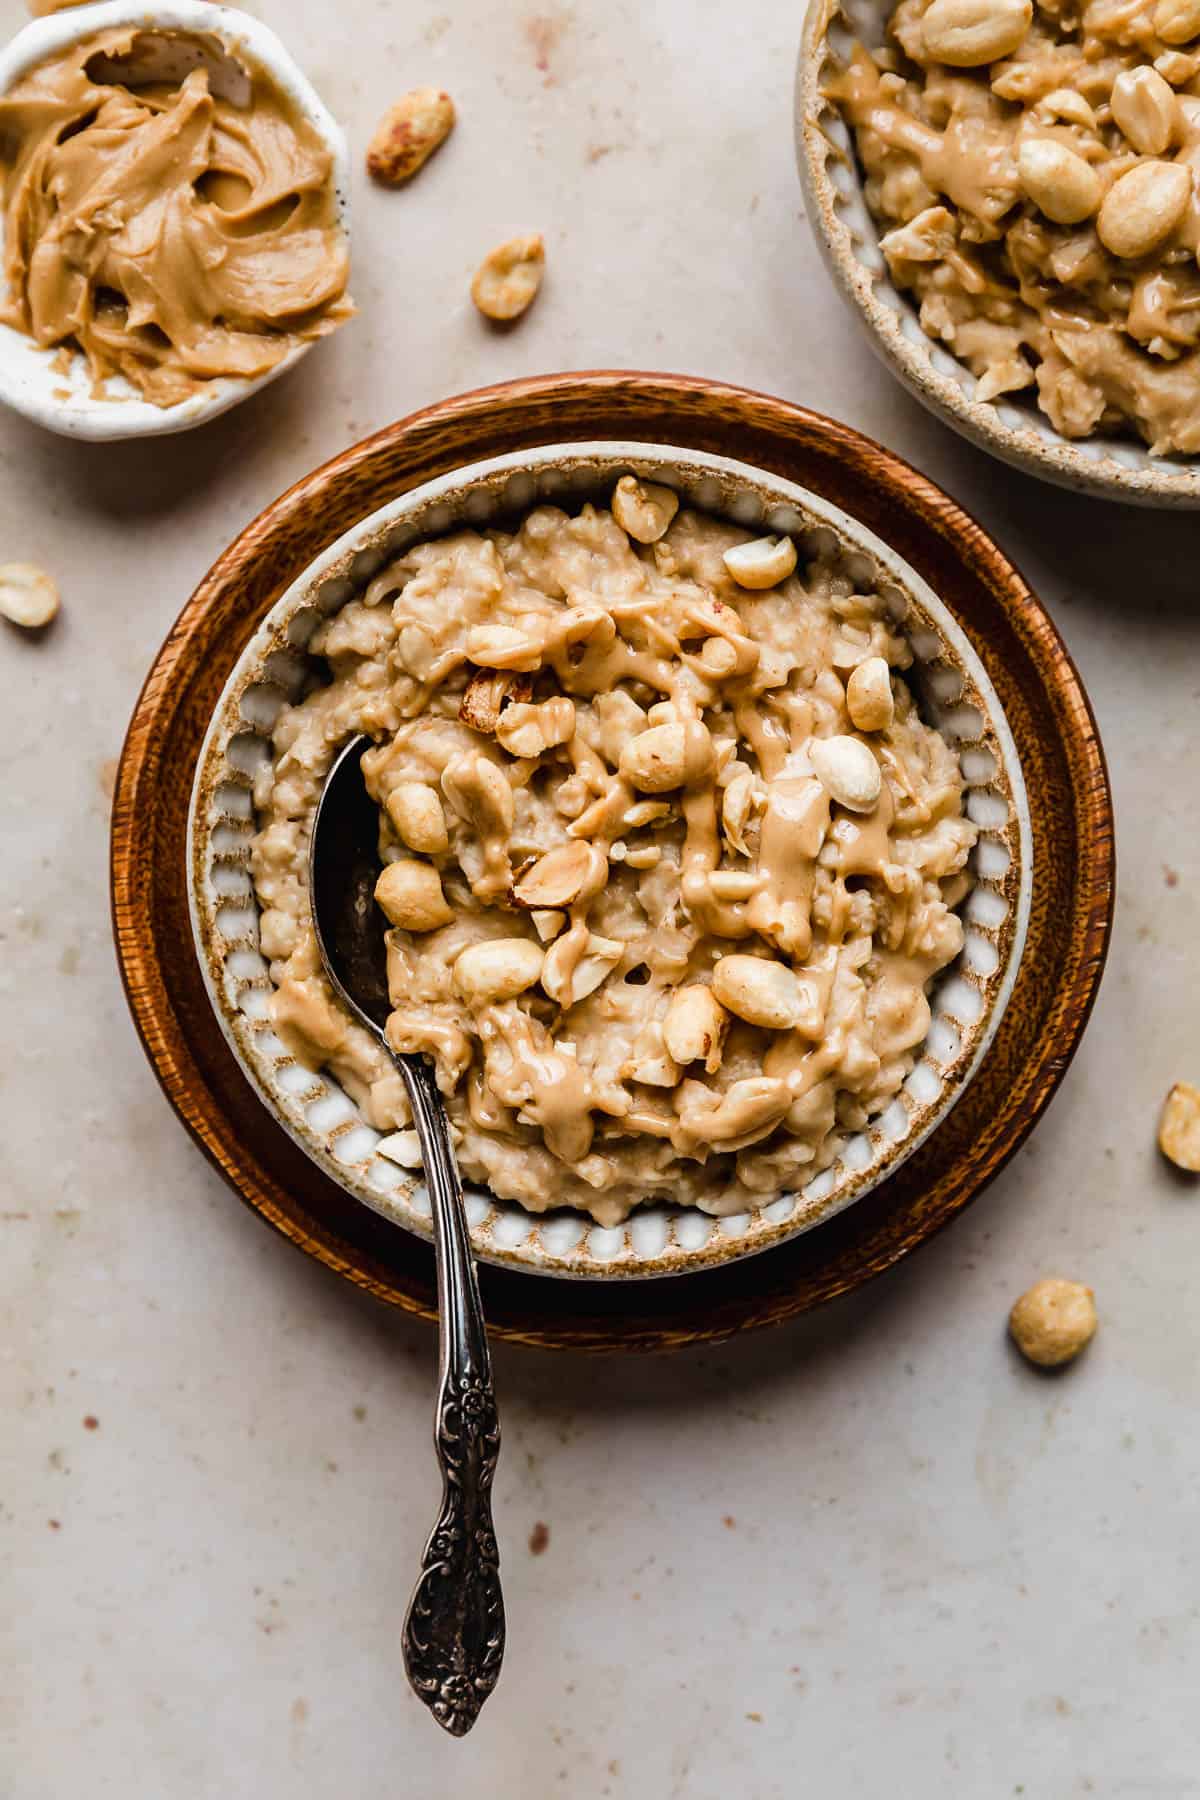 Peanut Butter Oatmeal topped with chopped peanuts in a tan bowl on a brown plate.